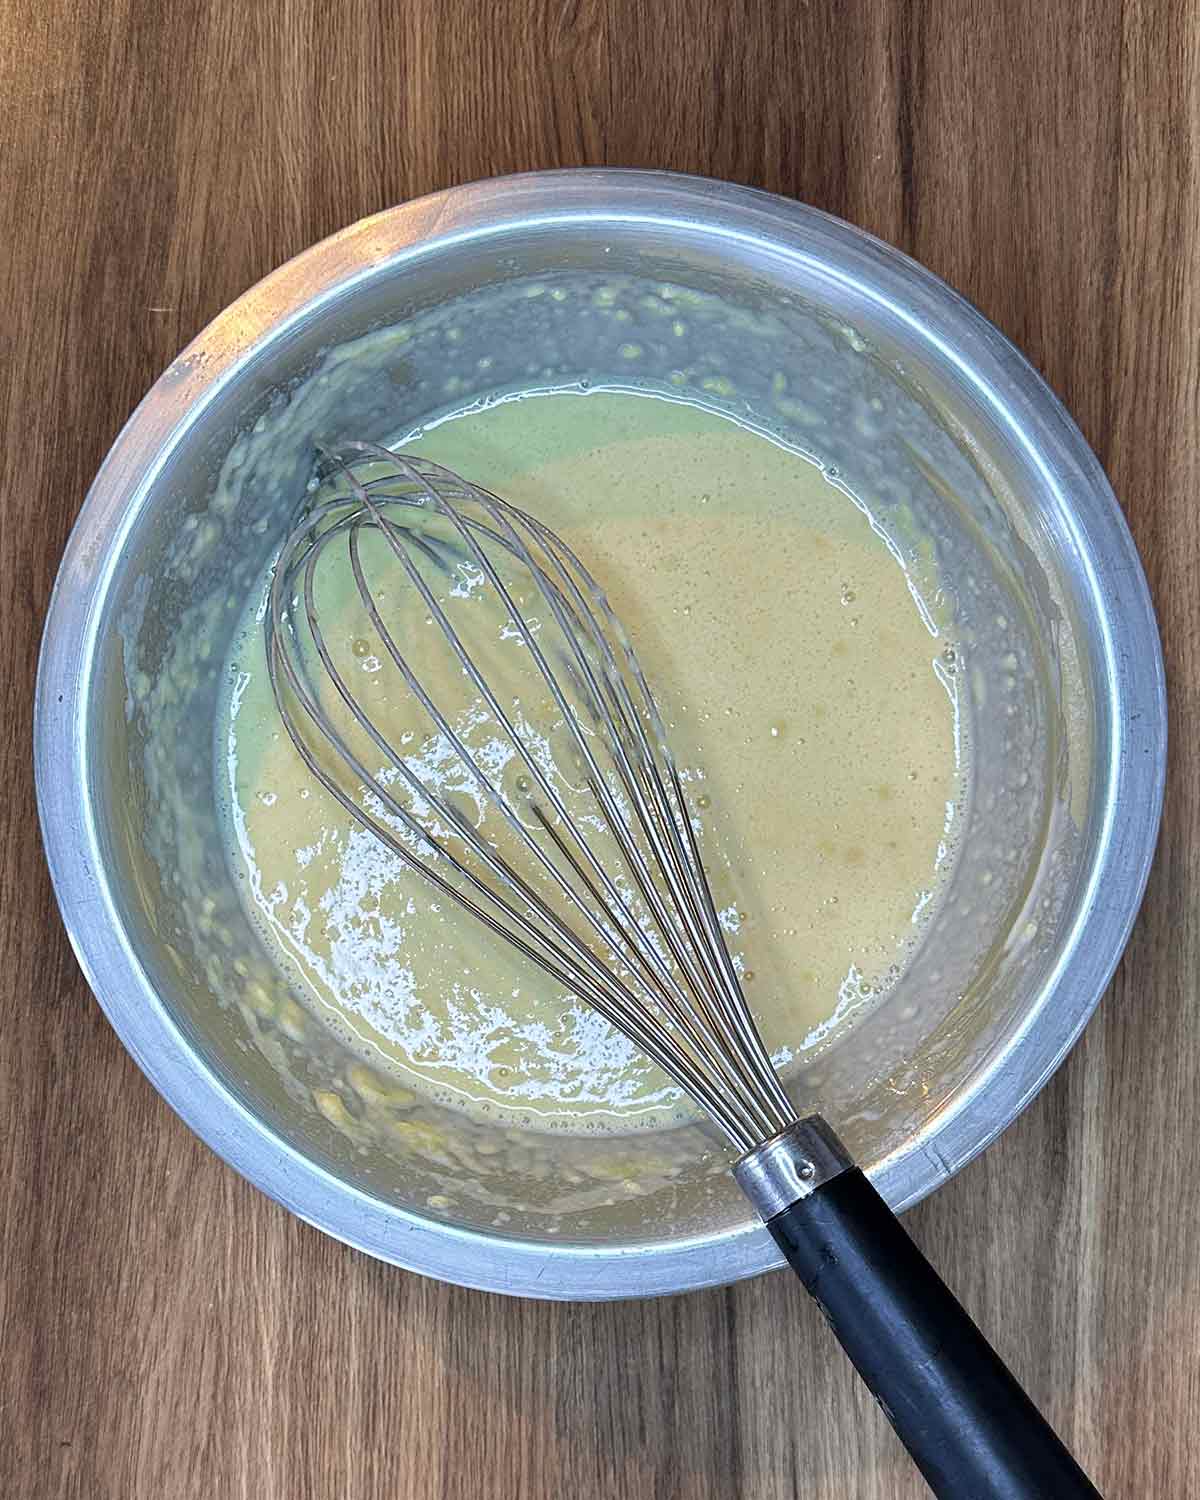 Yorkshire pudding batter formed in the bowl.